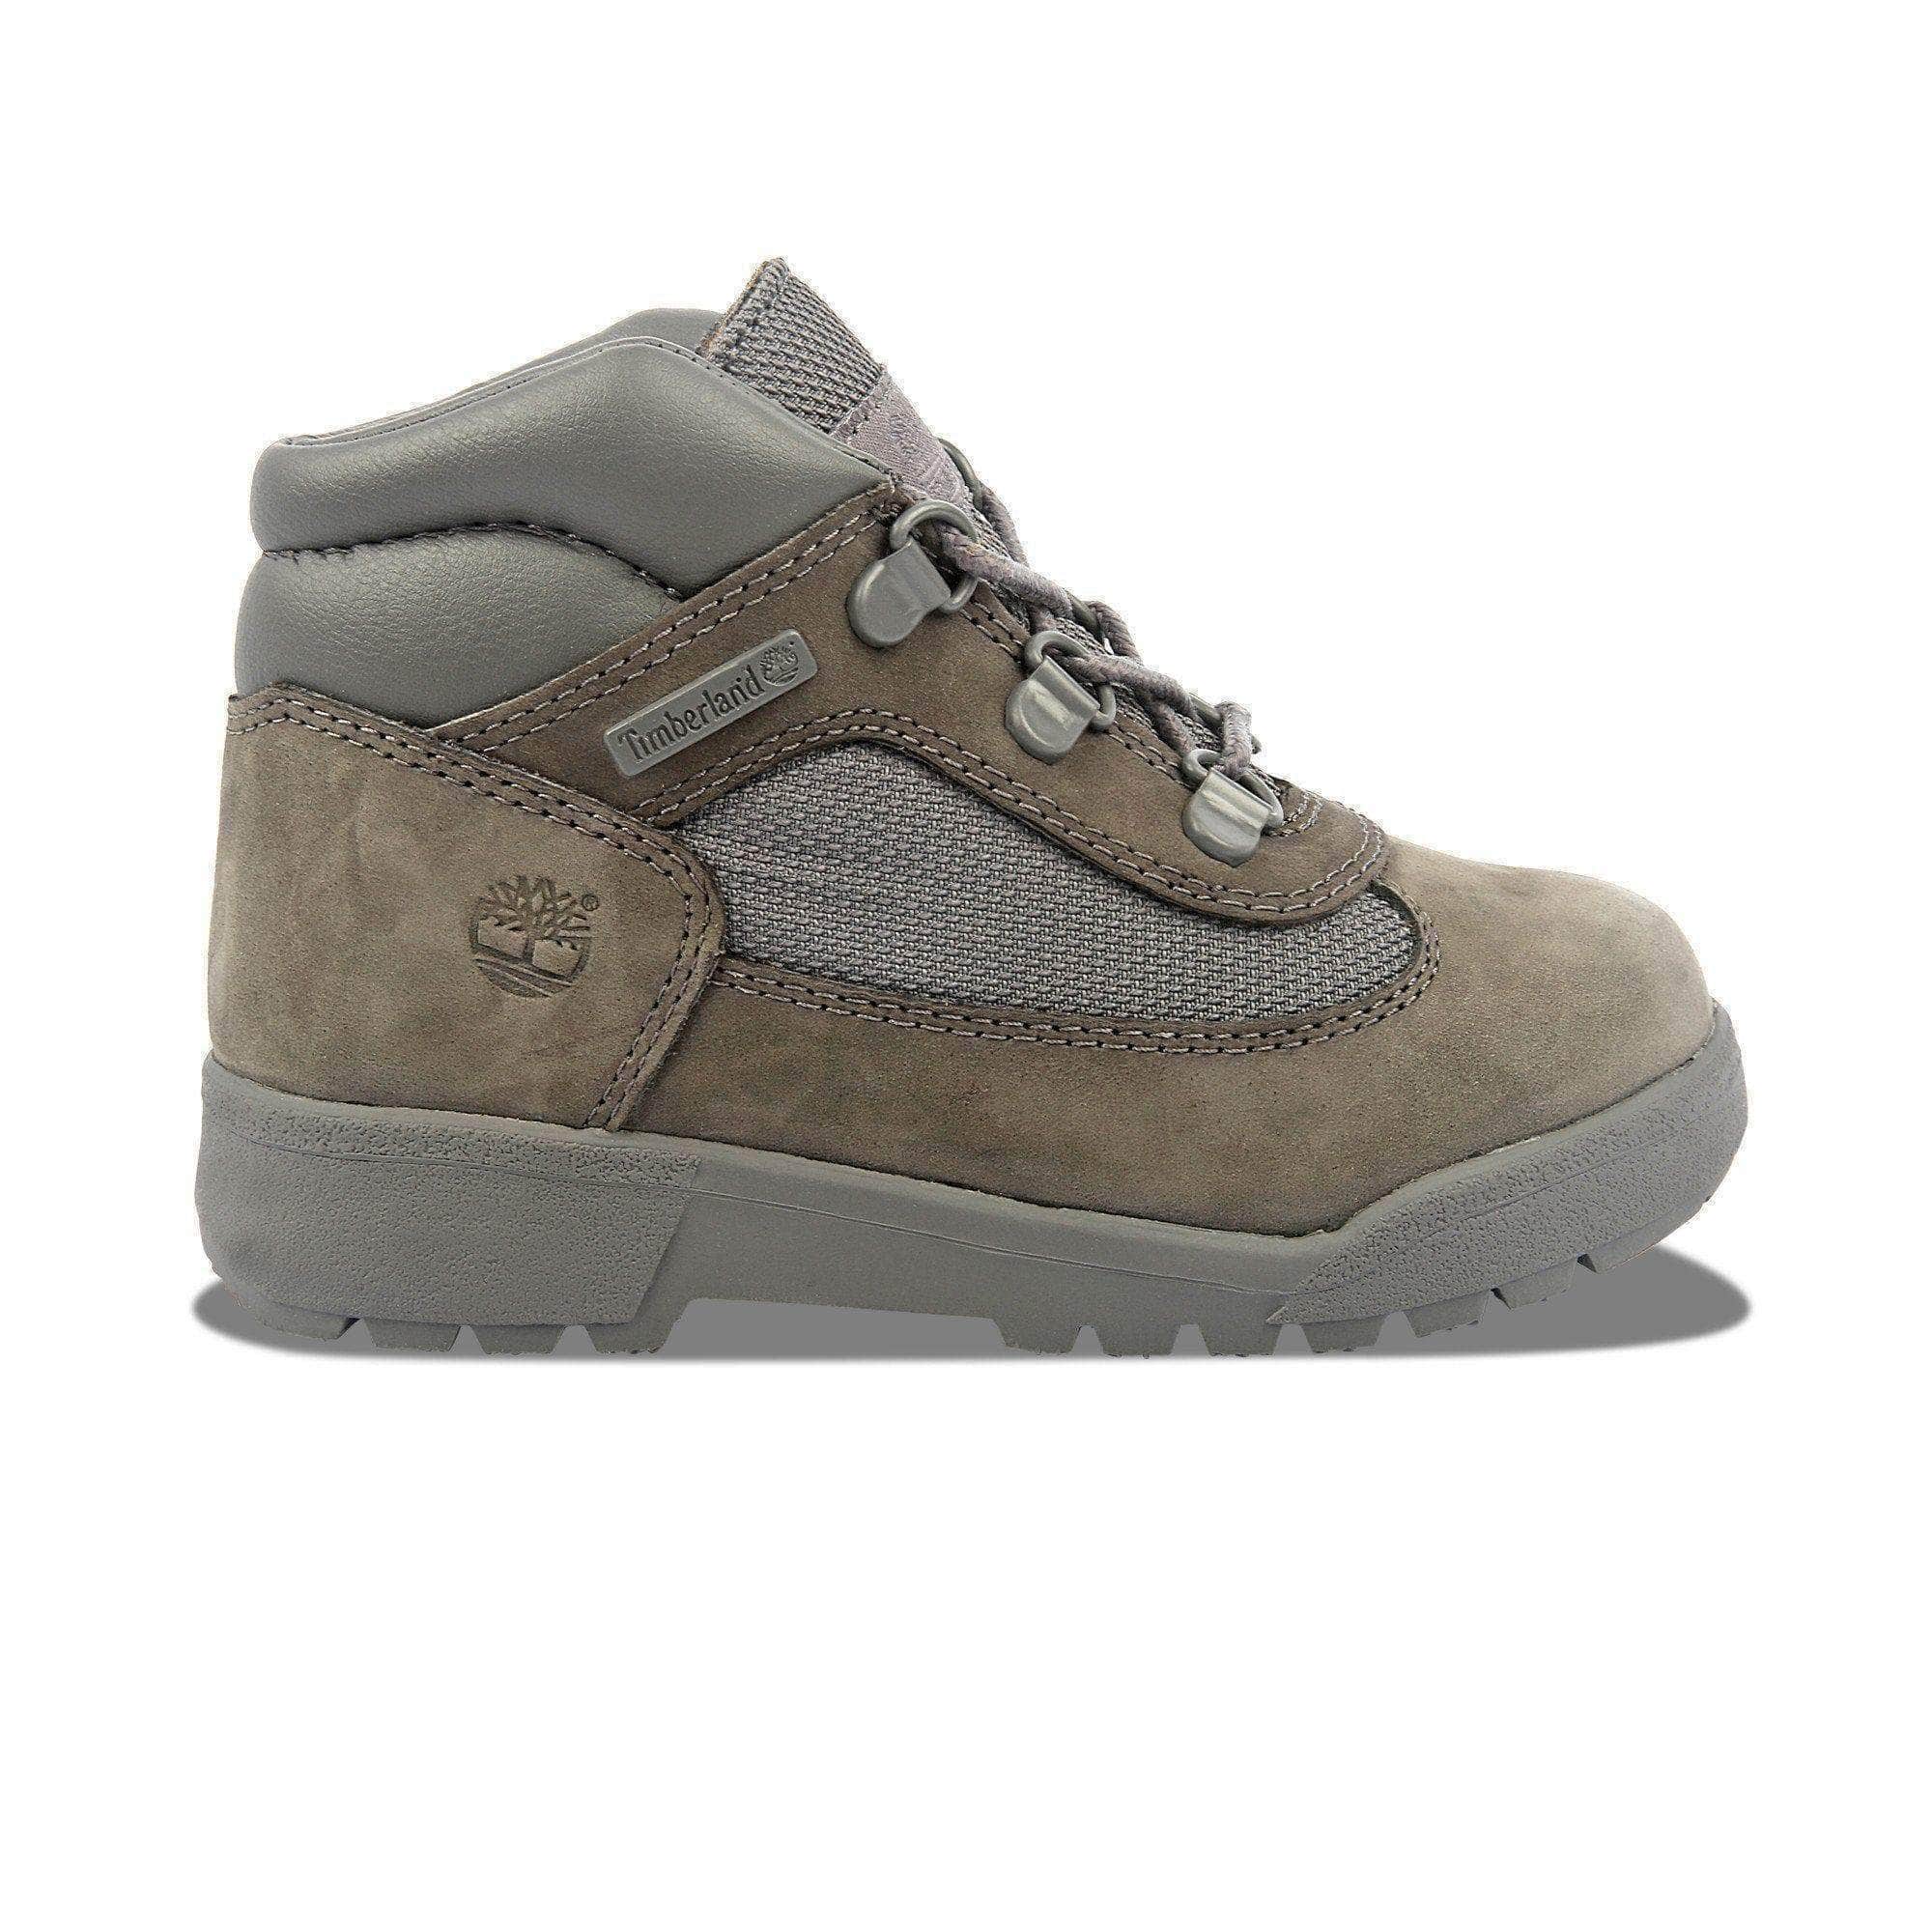 Timberland Field Boot - Boy's Toddler's